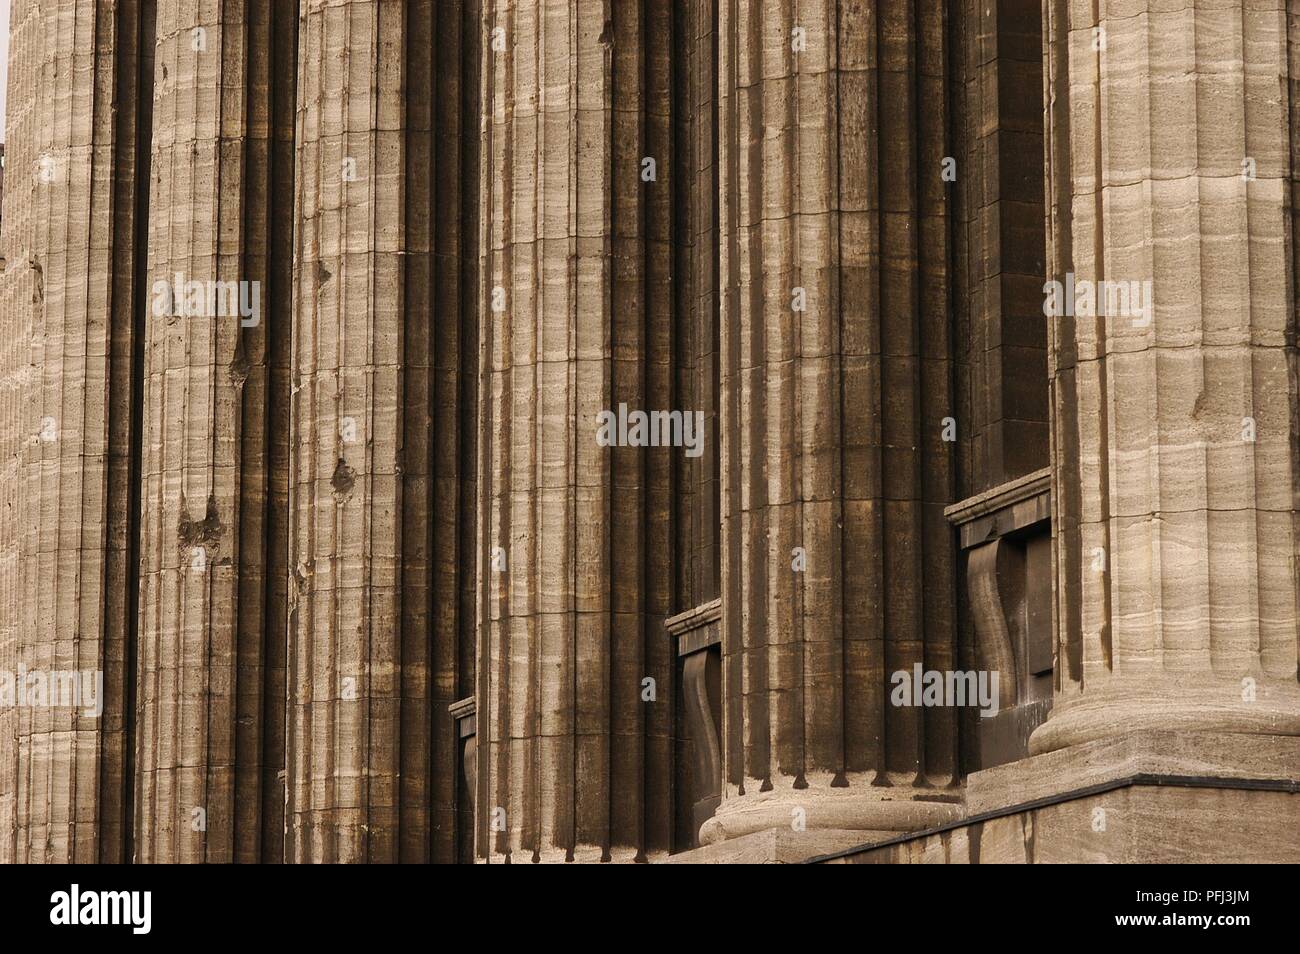 Germany, Berlin, Museumsinsel, Pergamon Museum, fluted columns Stock Photo